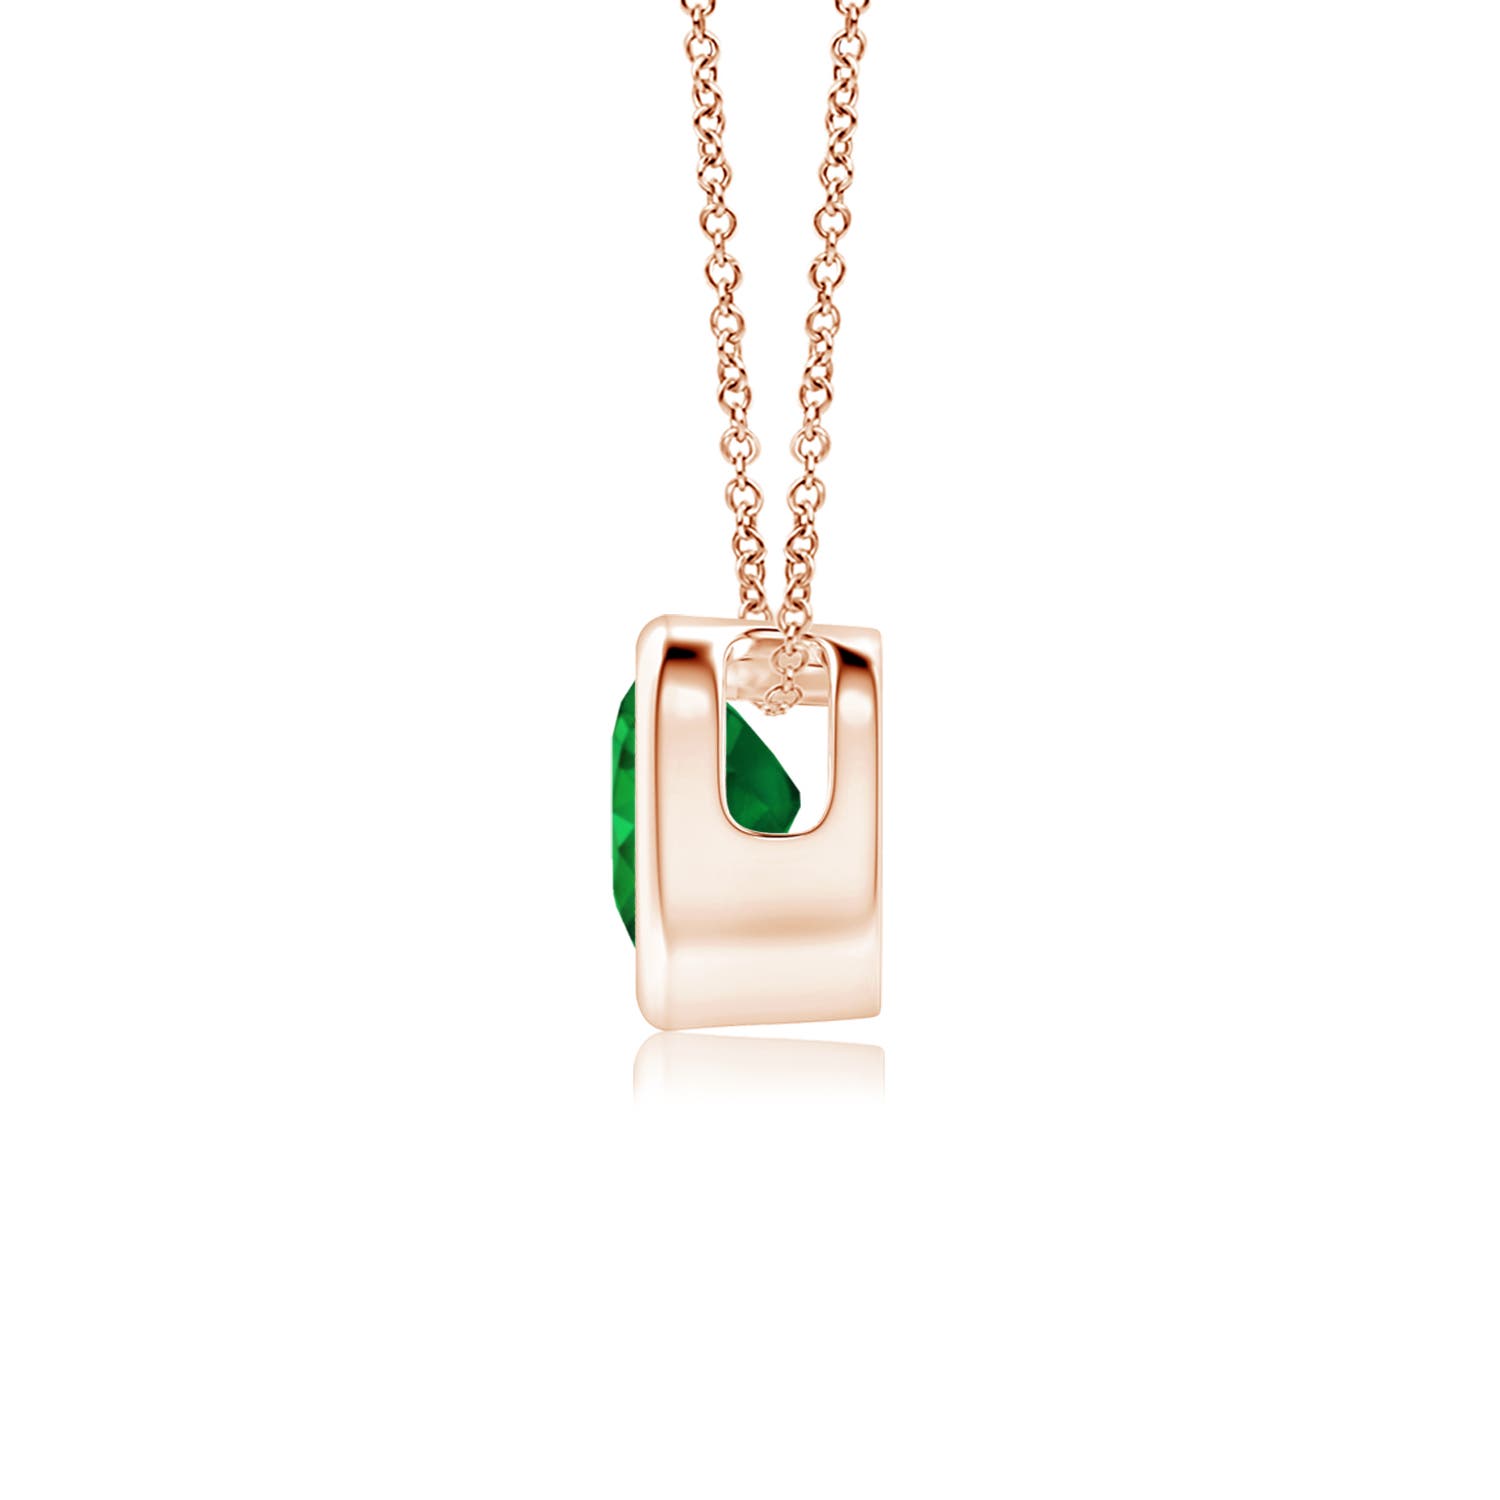 AAA - Emerald / 0.2 CT / 14 KT Rose Gold